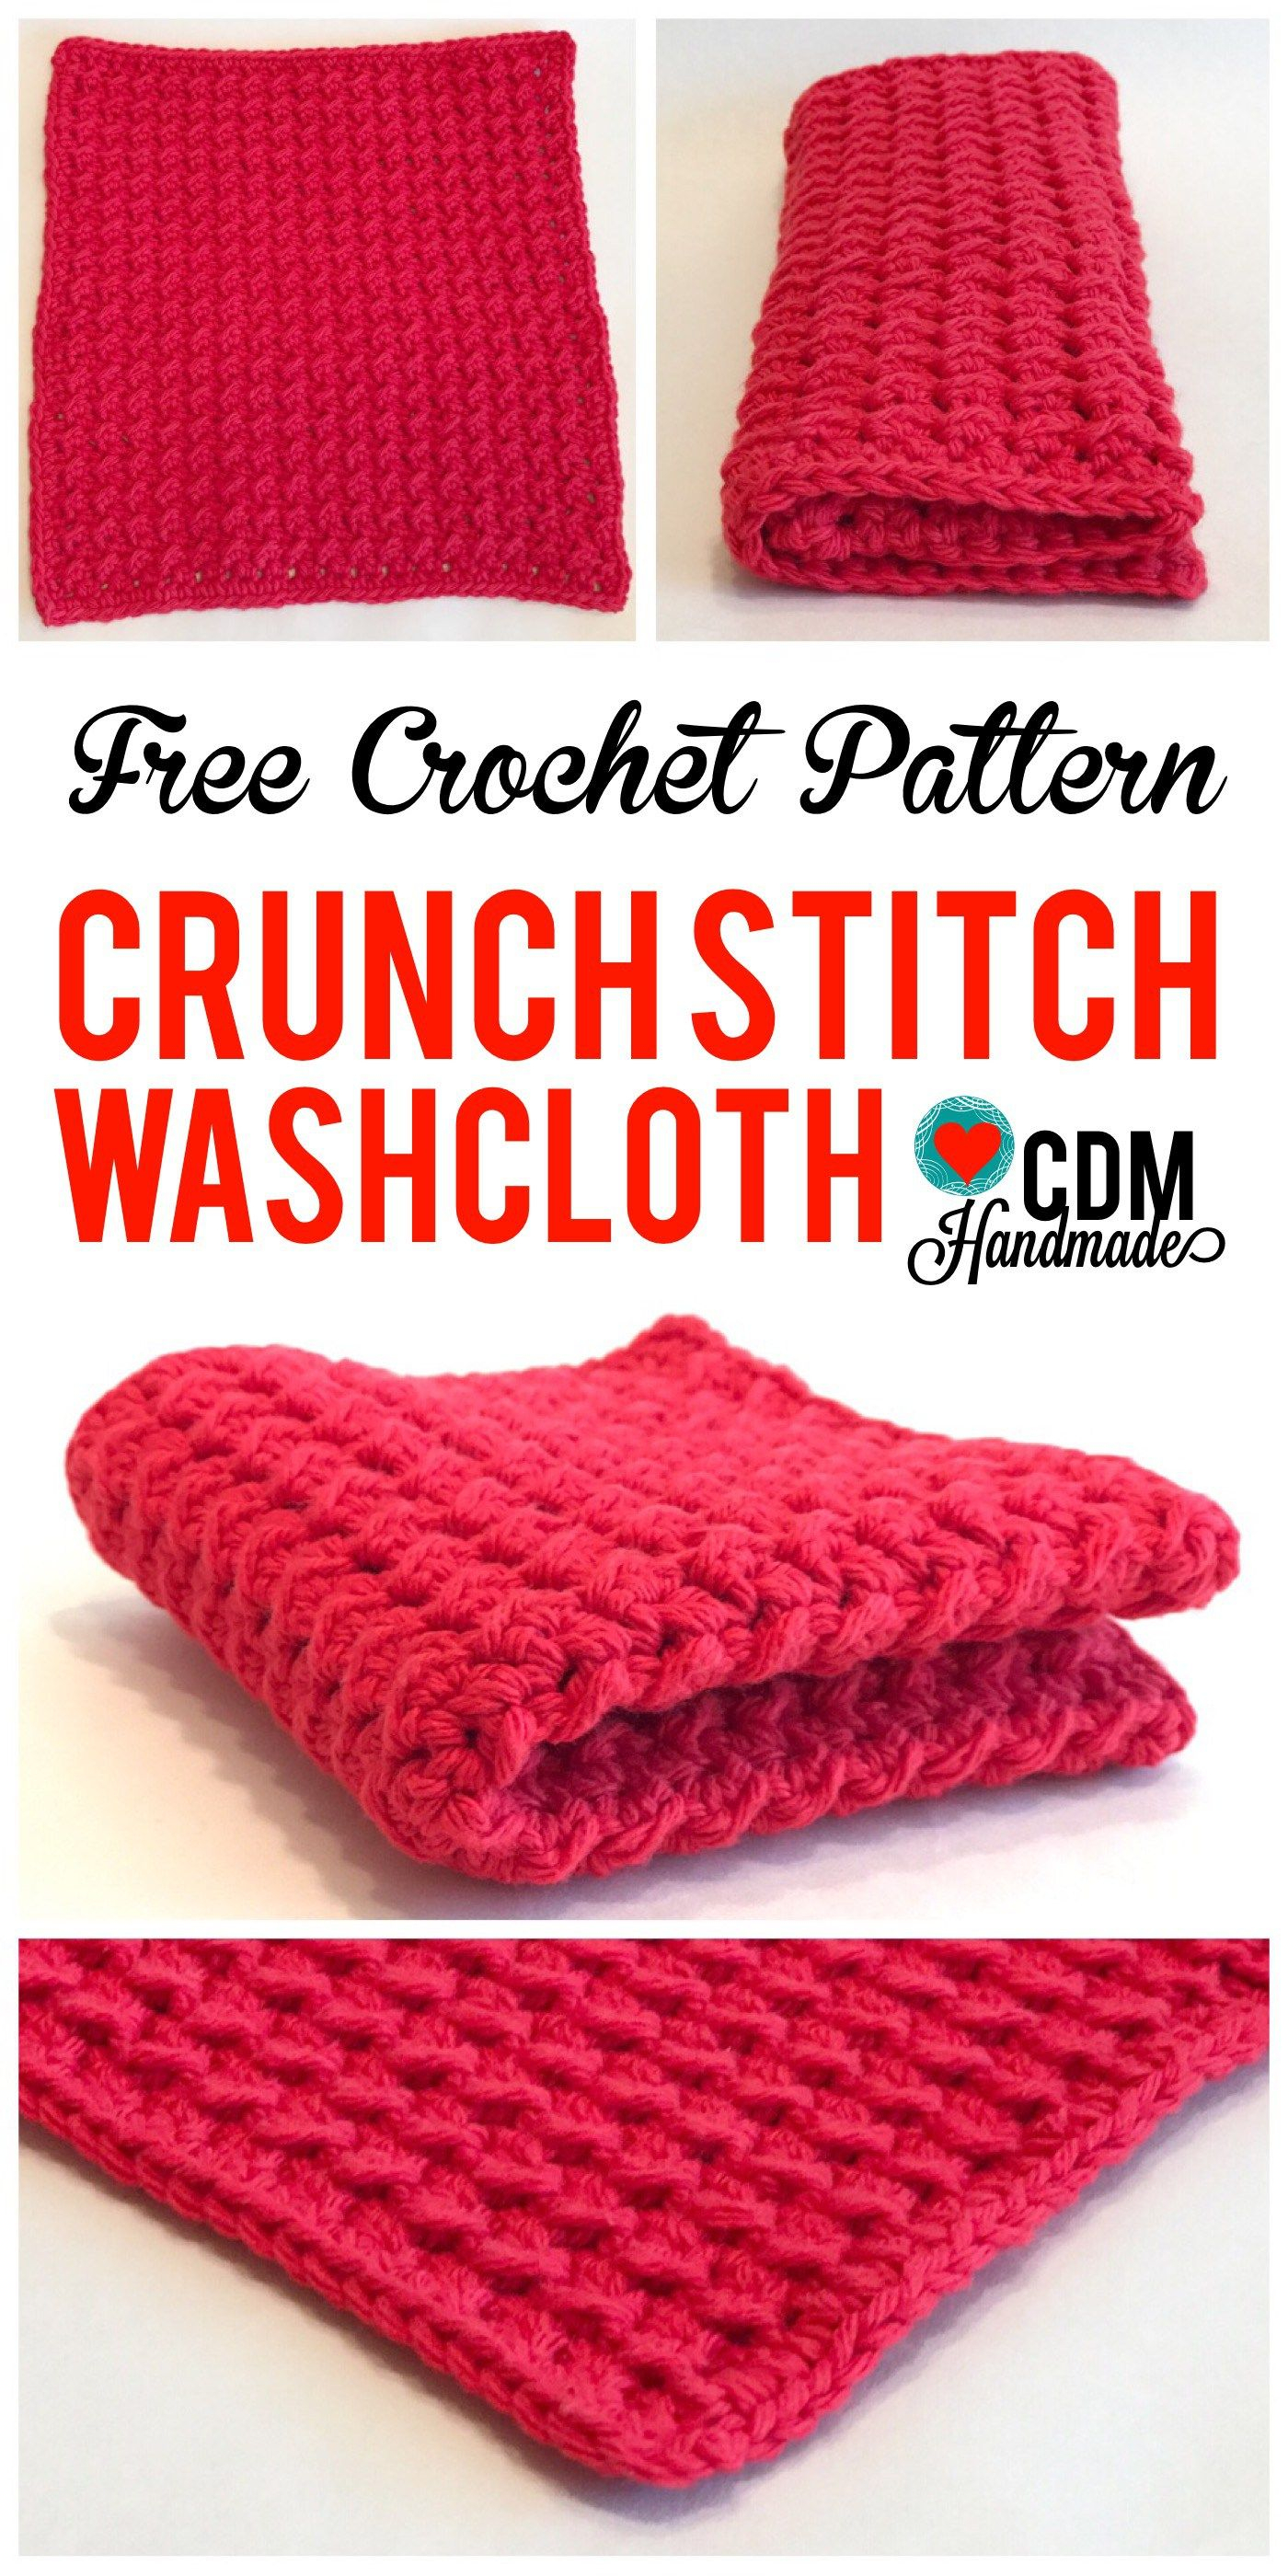 Free Crochet Patterns For Dishcloths Check Out This Quick And Easy Free Crochet Washcloth Pattern For My